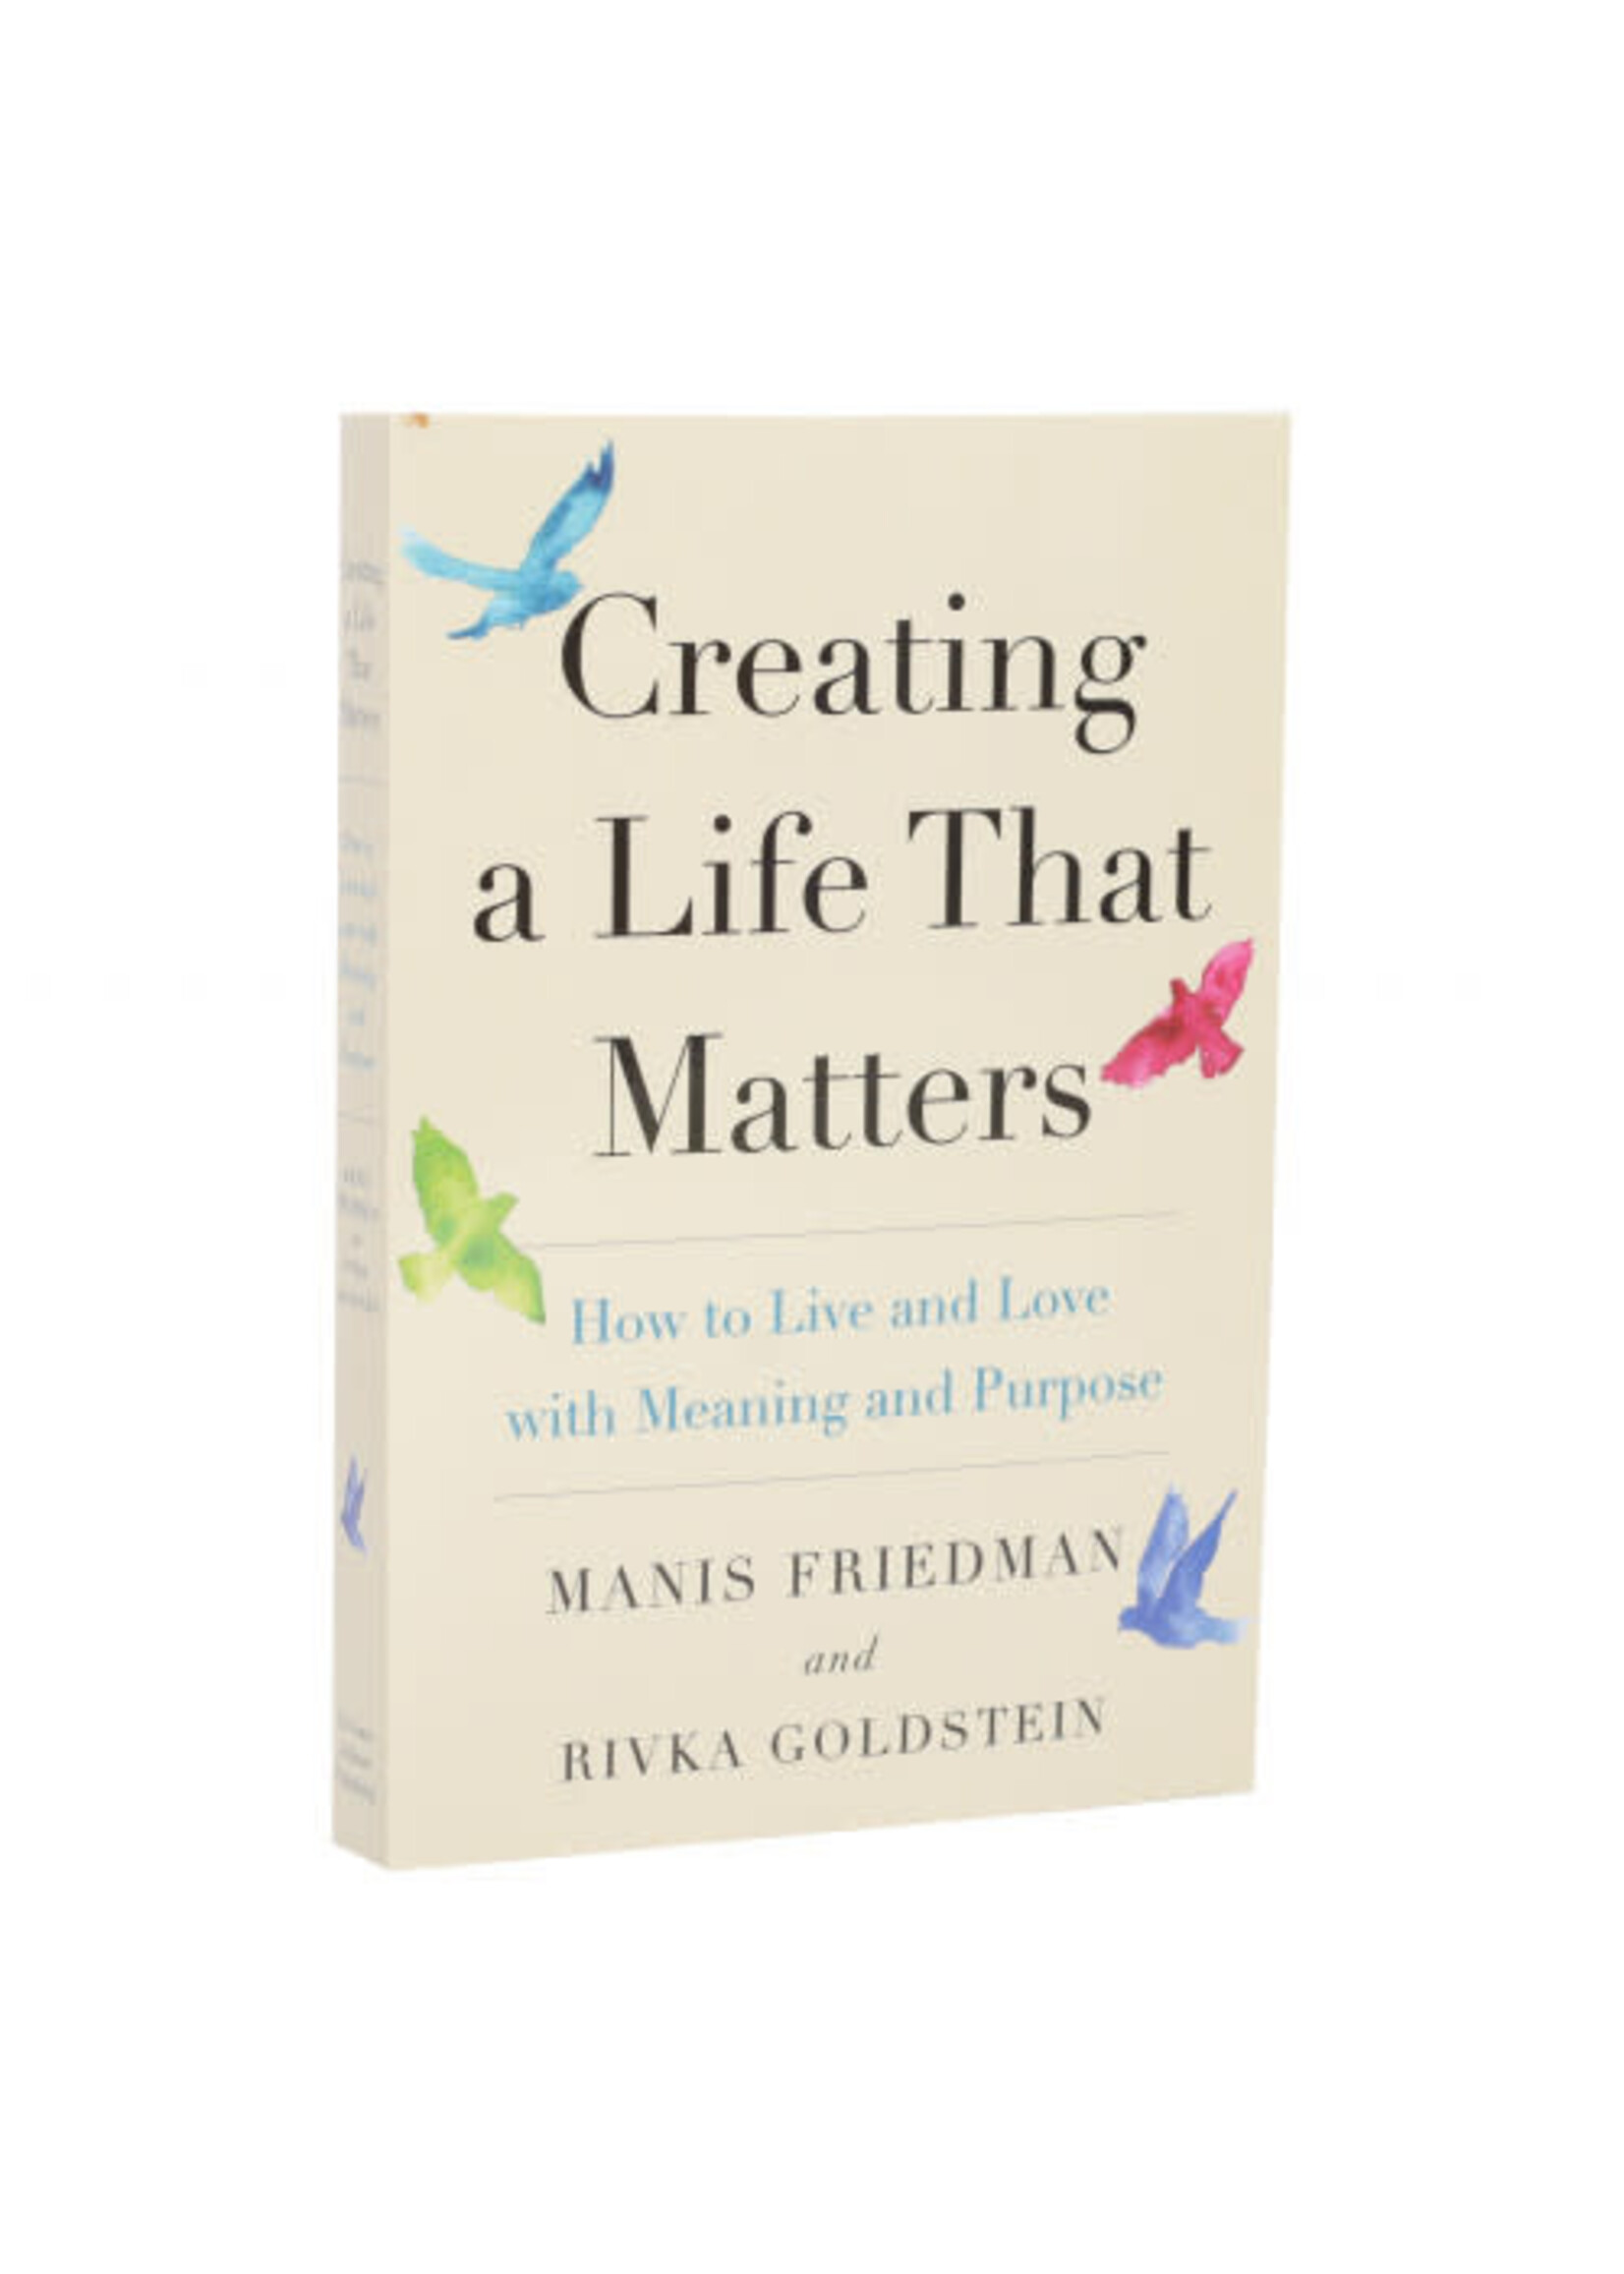 CREATING A LIFE THAT MATTERS